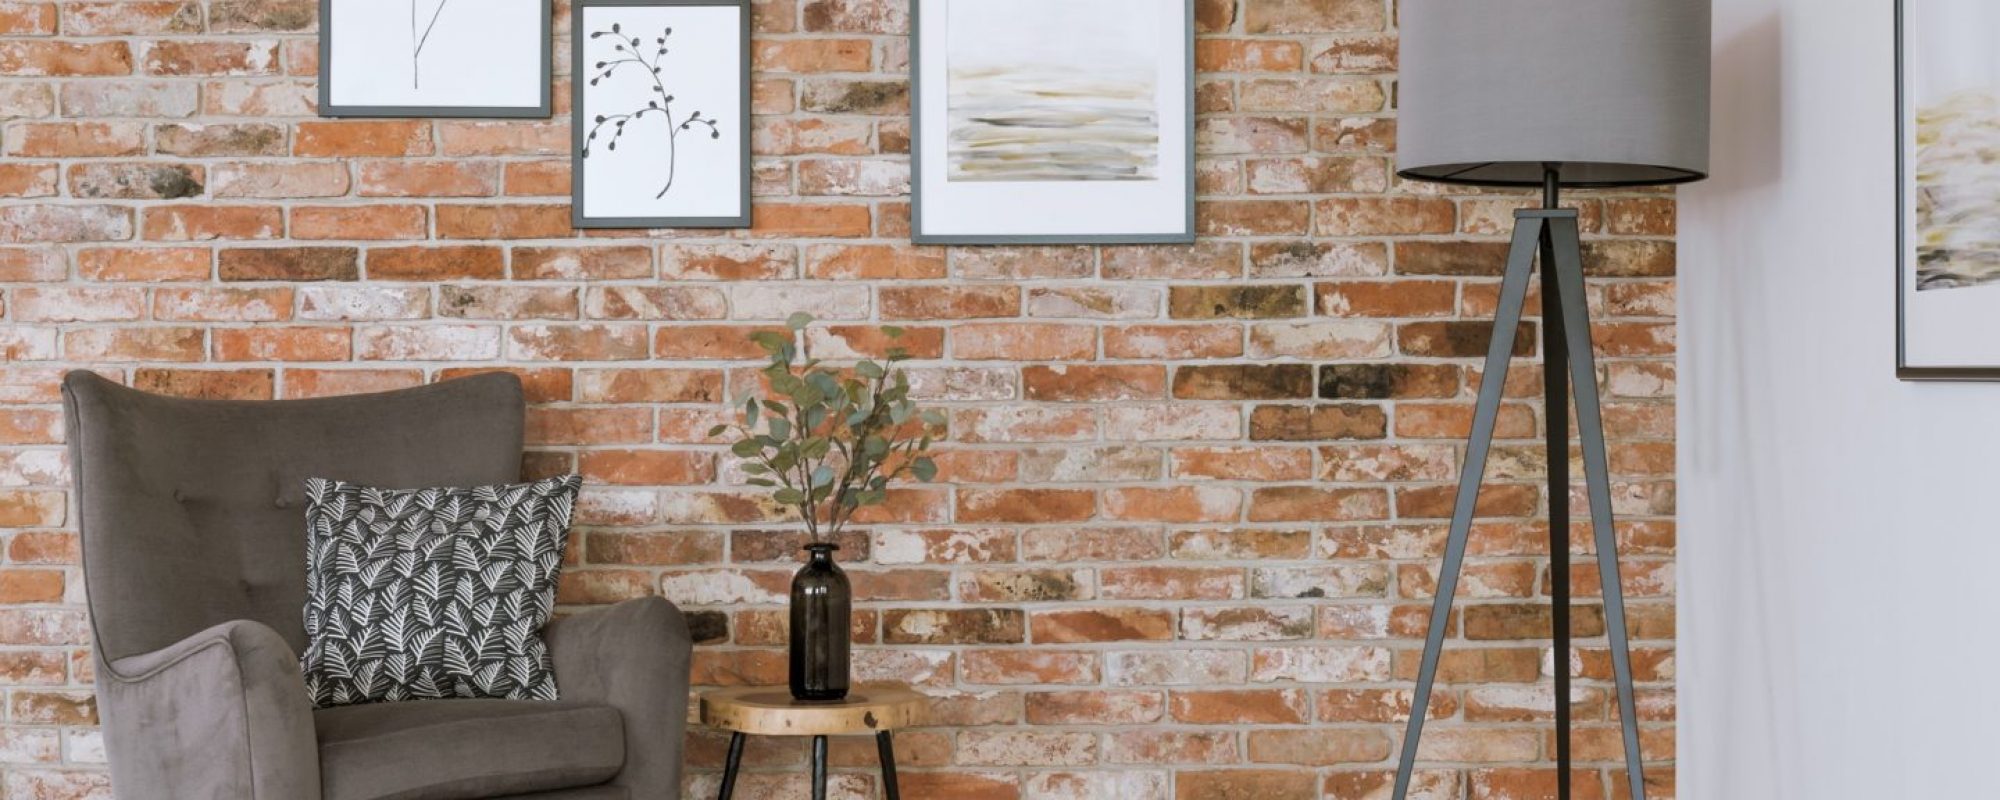 Gray furniture against brick wall